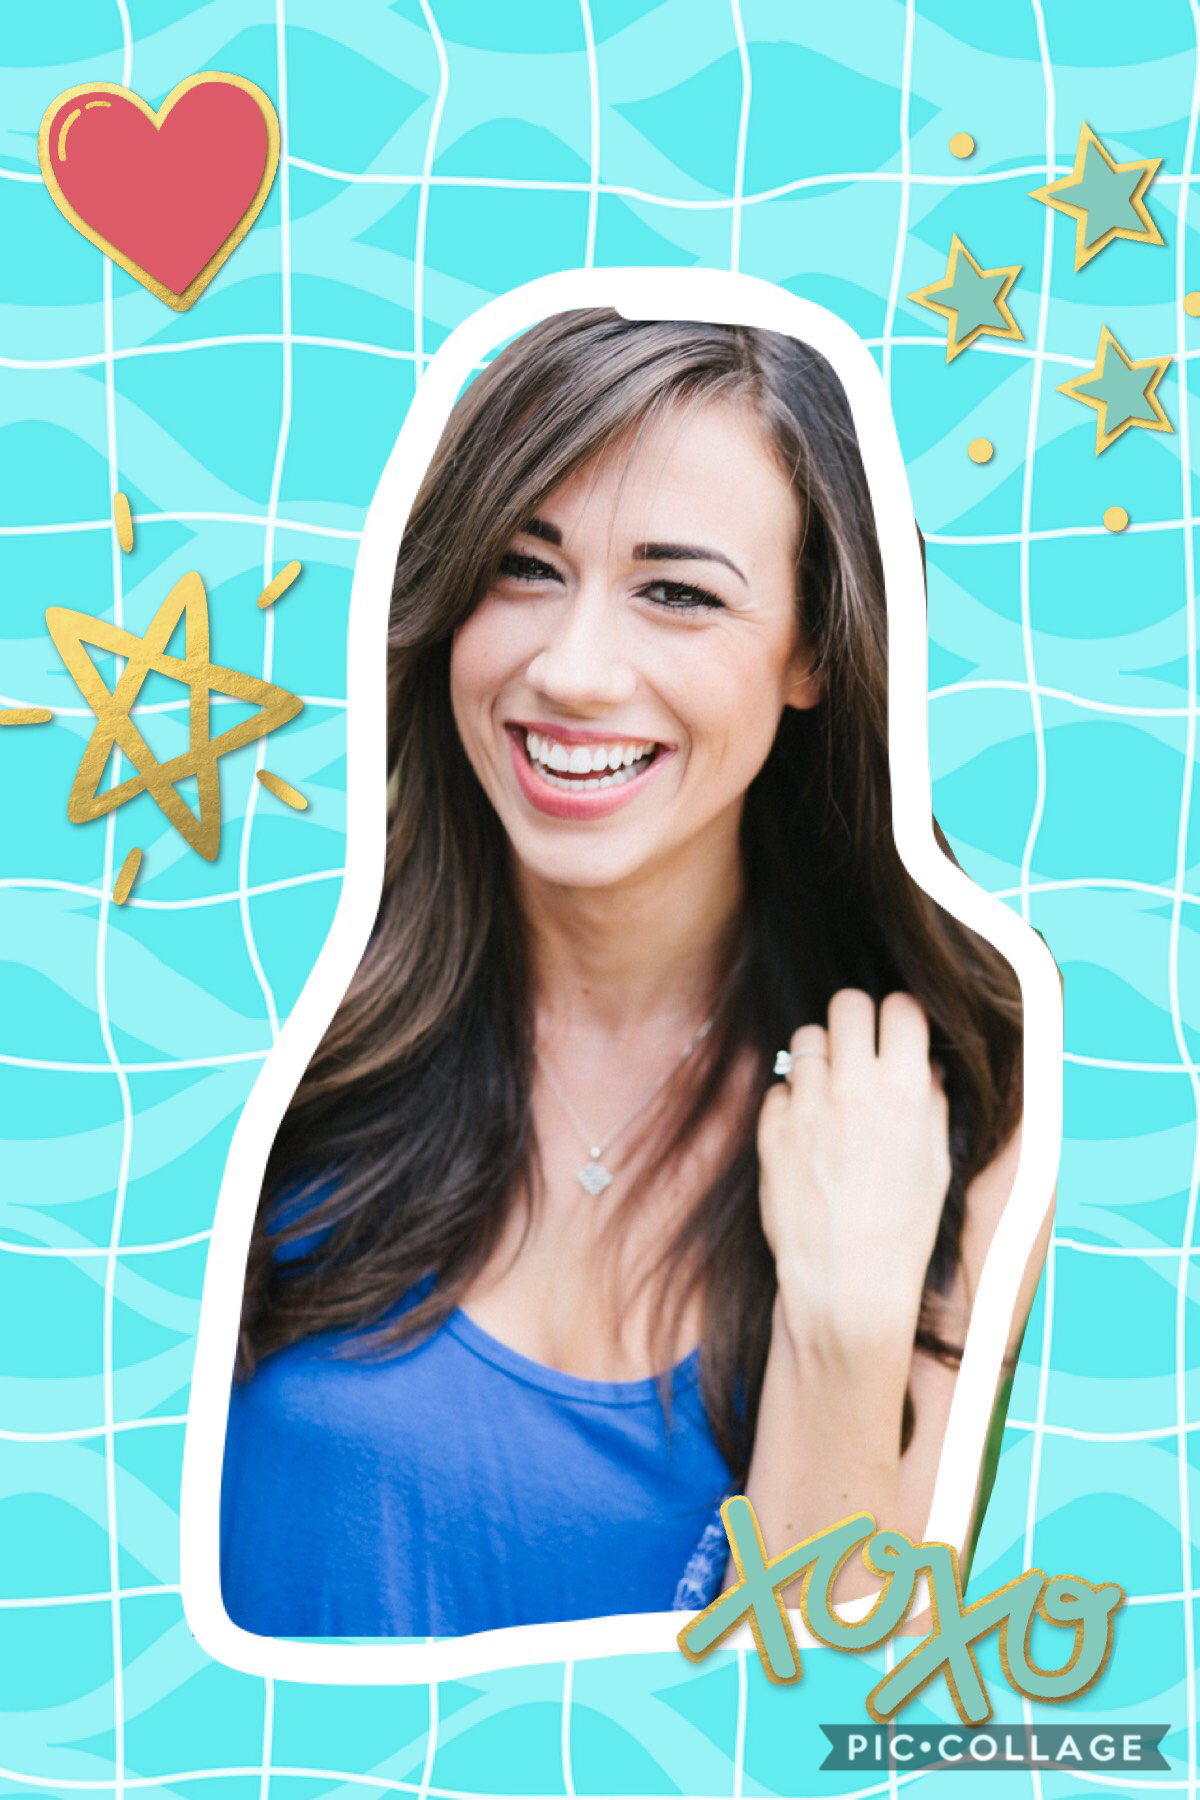 Who else is excited for Colleen’s baby?!